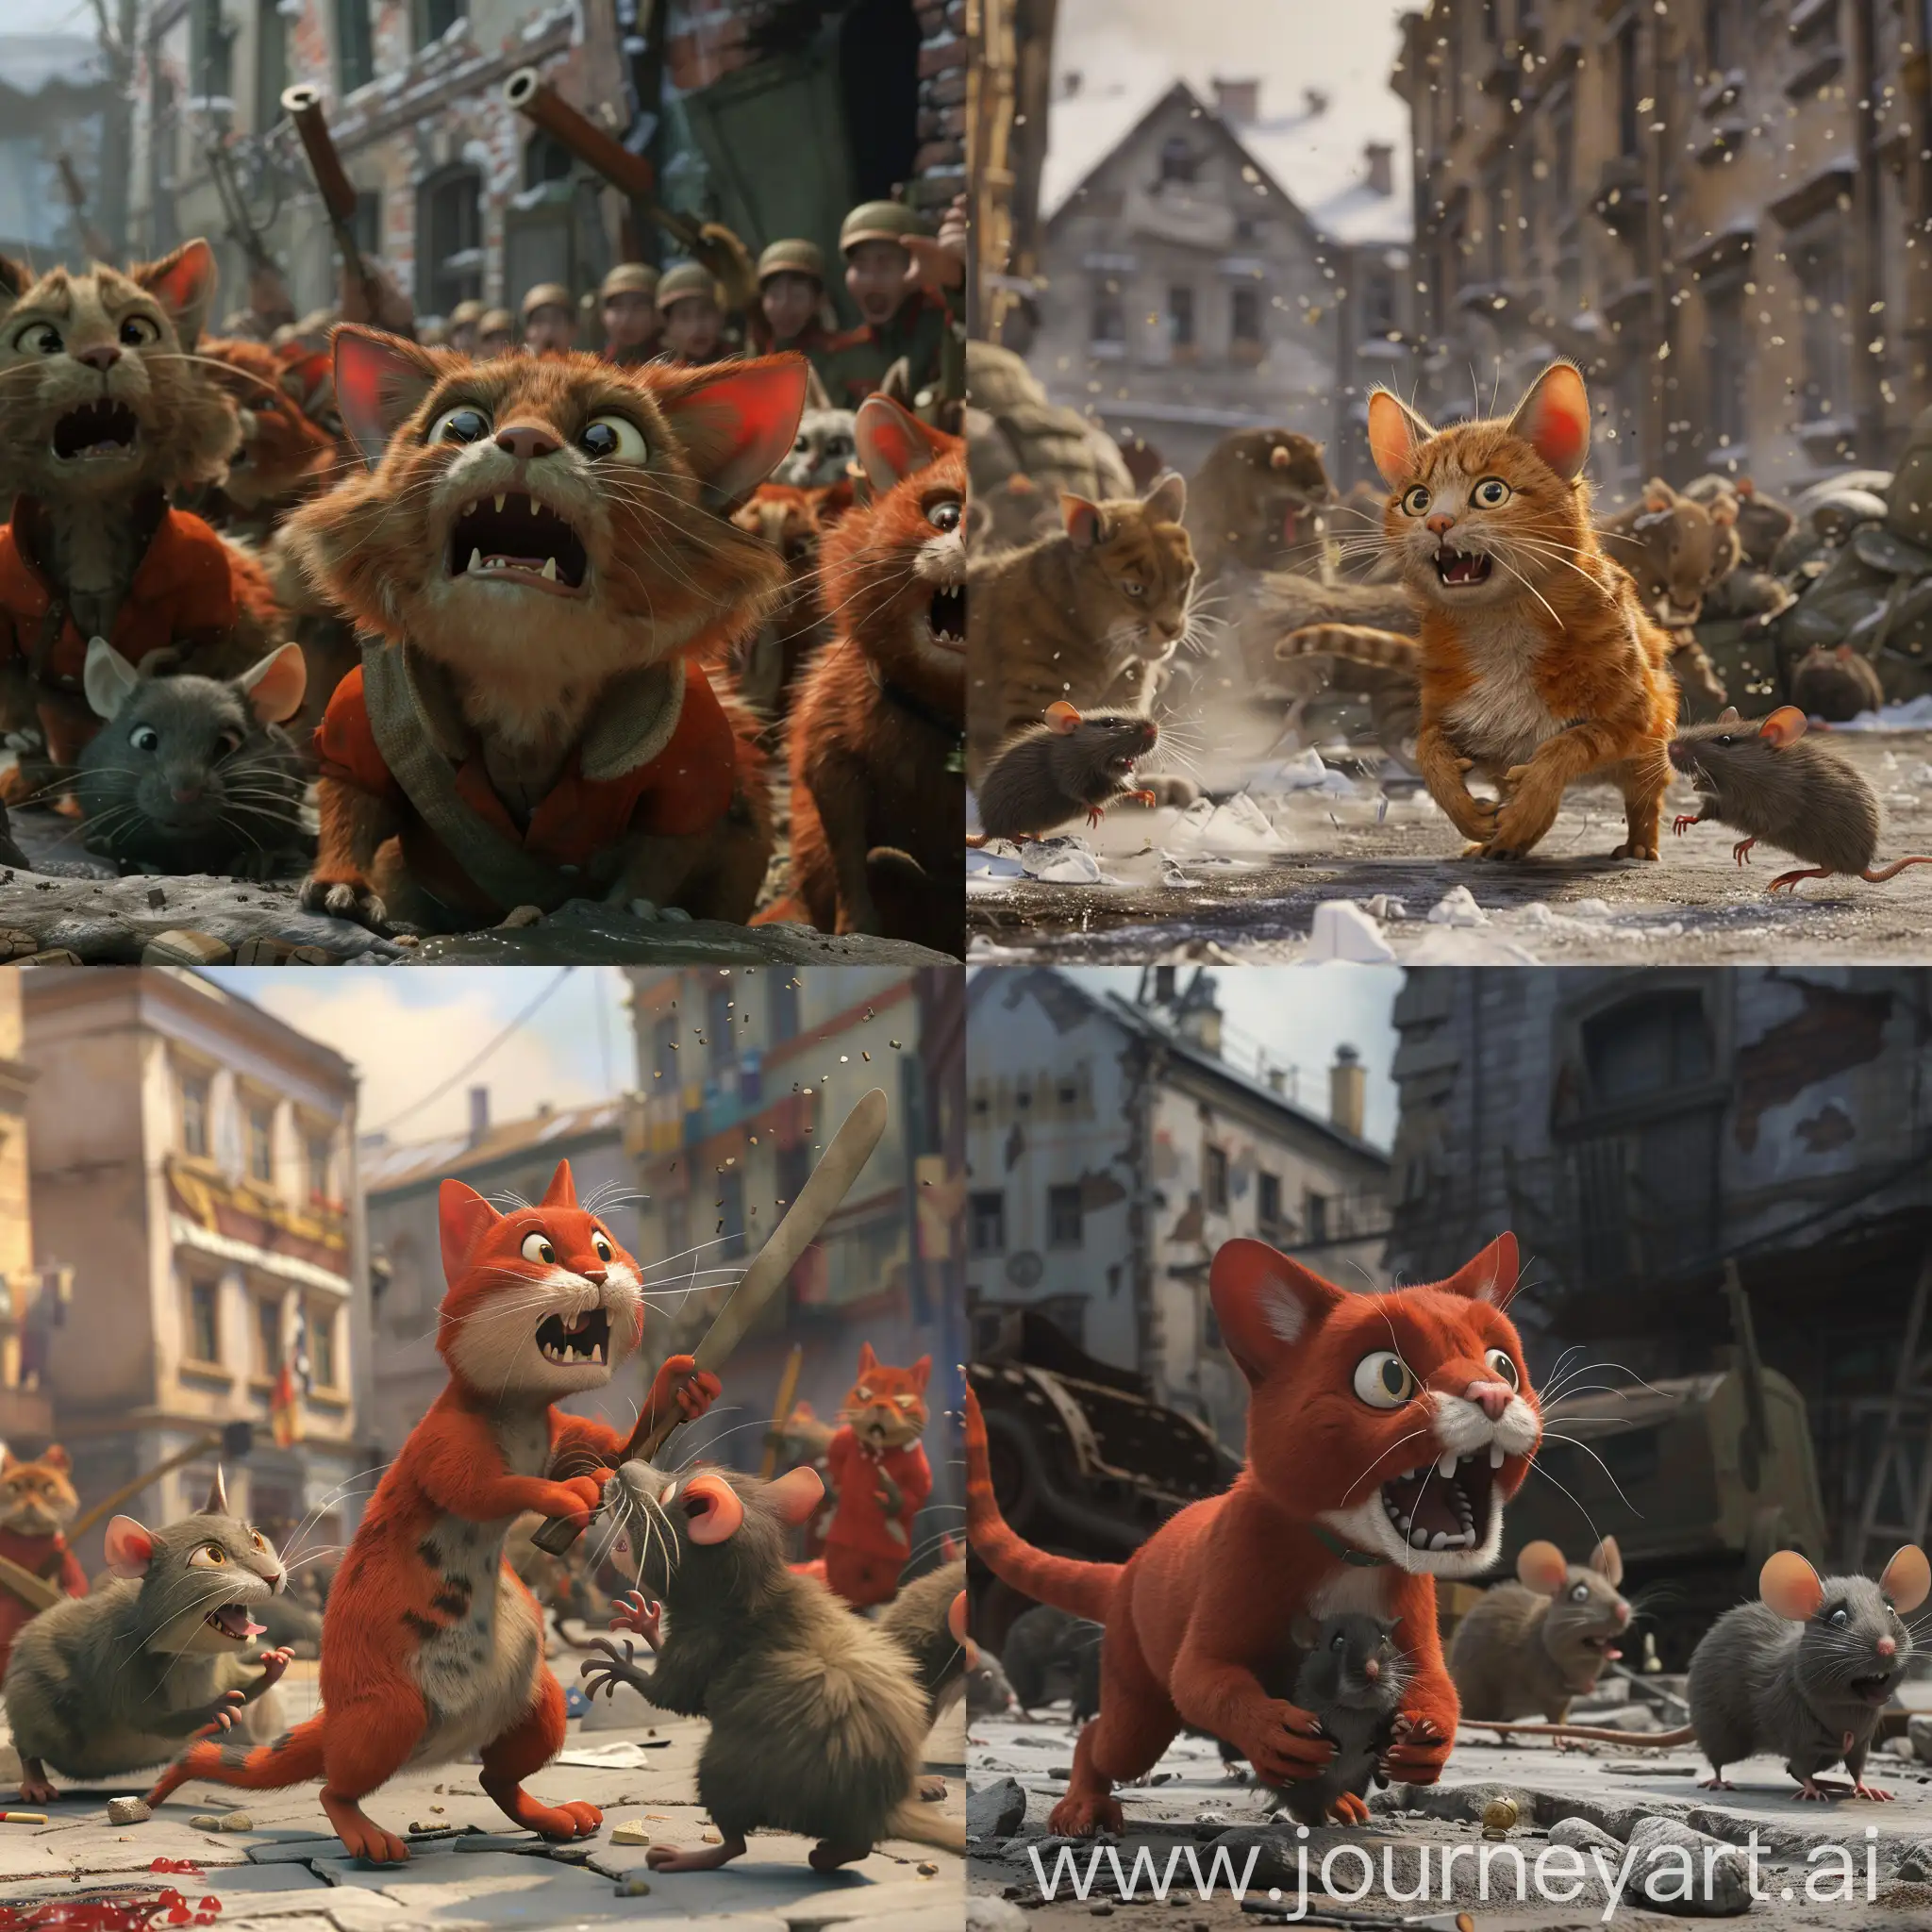 Red army cats battle with German army rats, fighting, hunger, hero, Leningrad, WWII, 1943, Pixar animation style